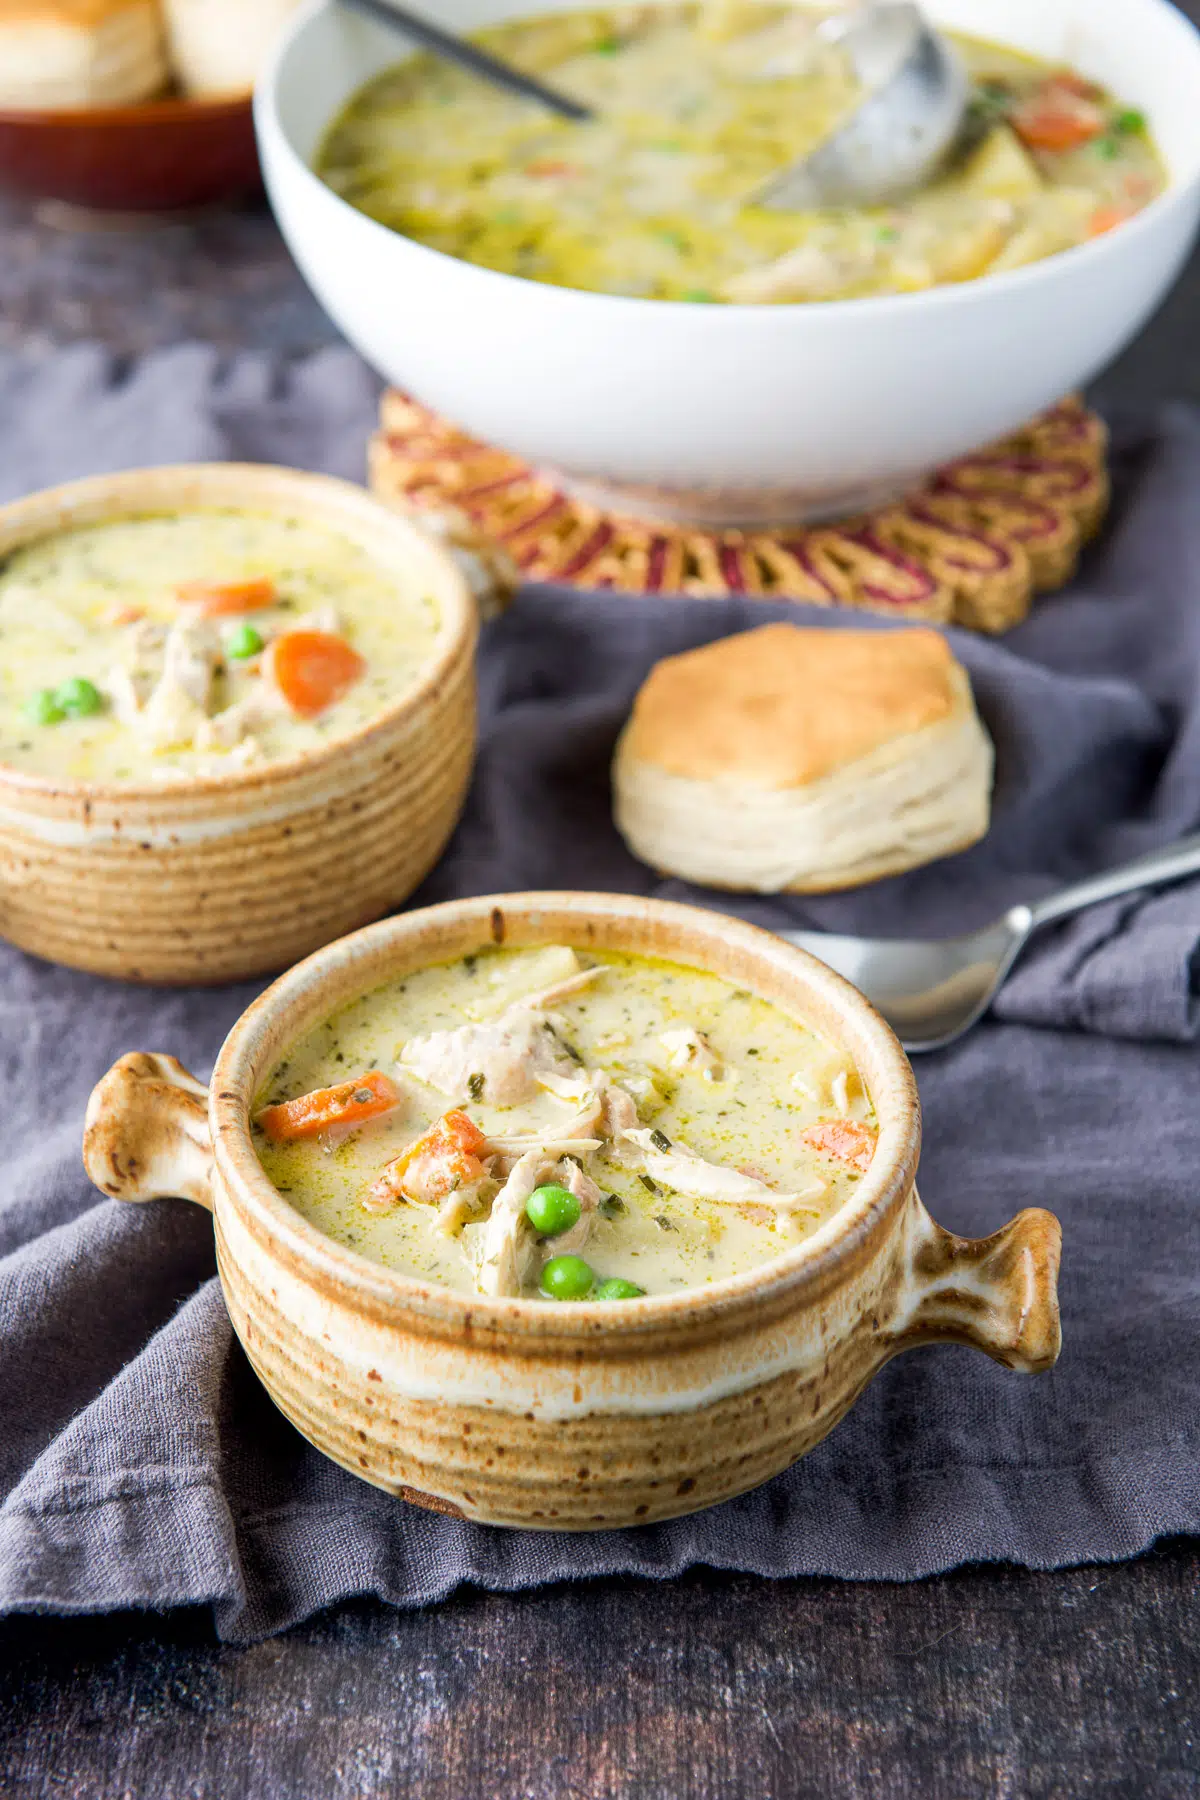 Two bowls of chicken soup in front of a spoon, biscuit and serving bowl